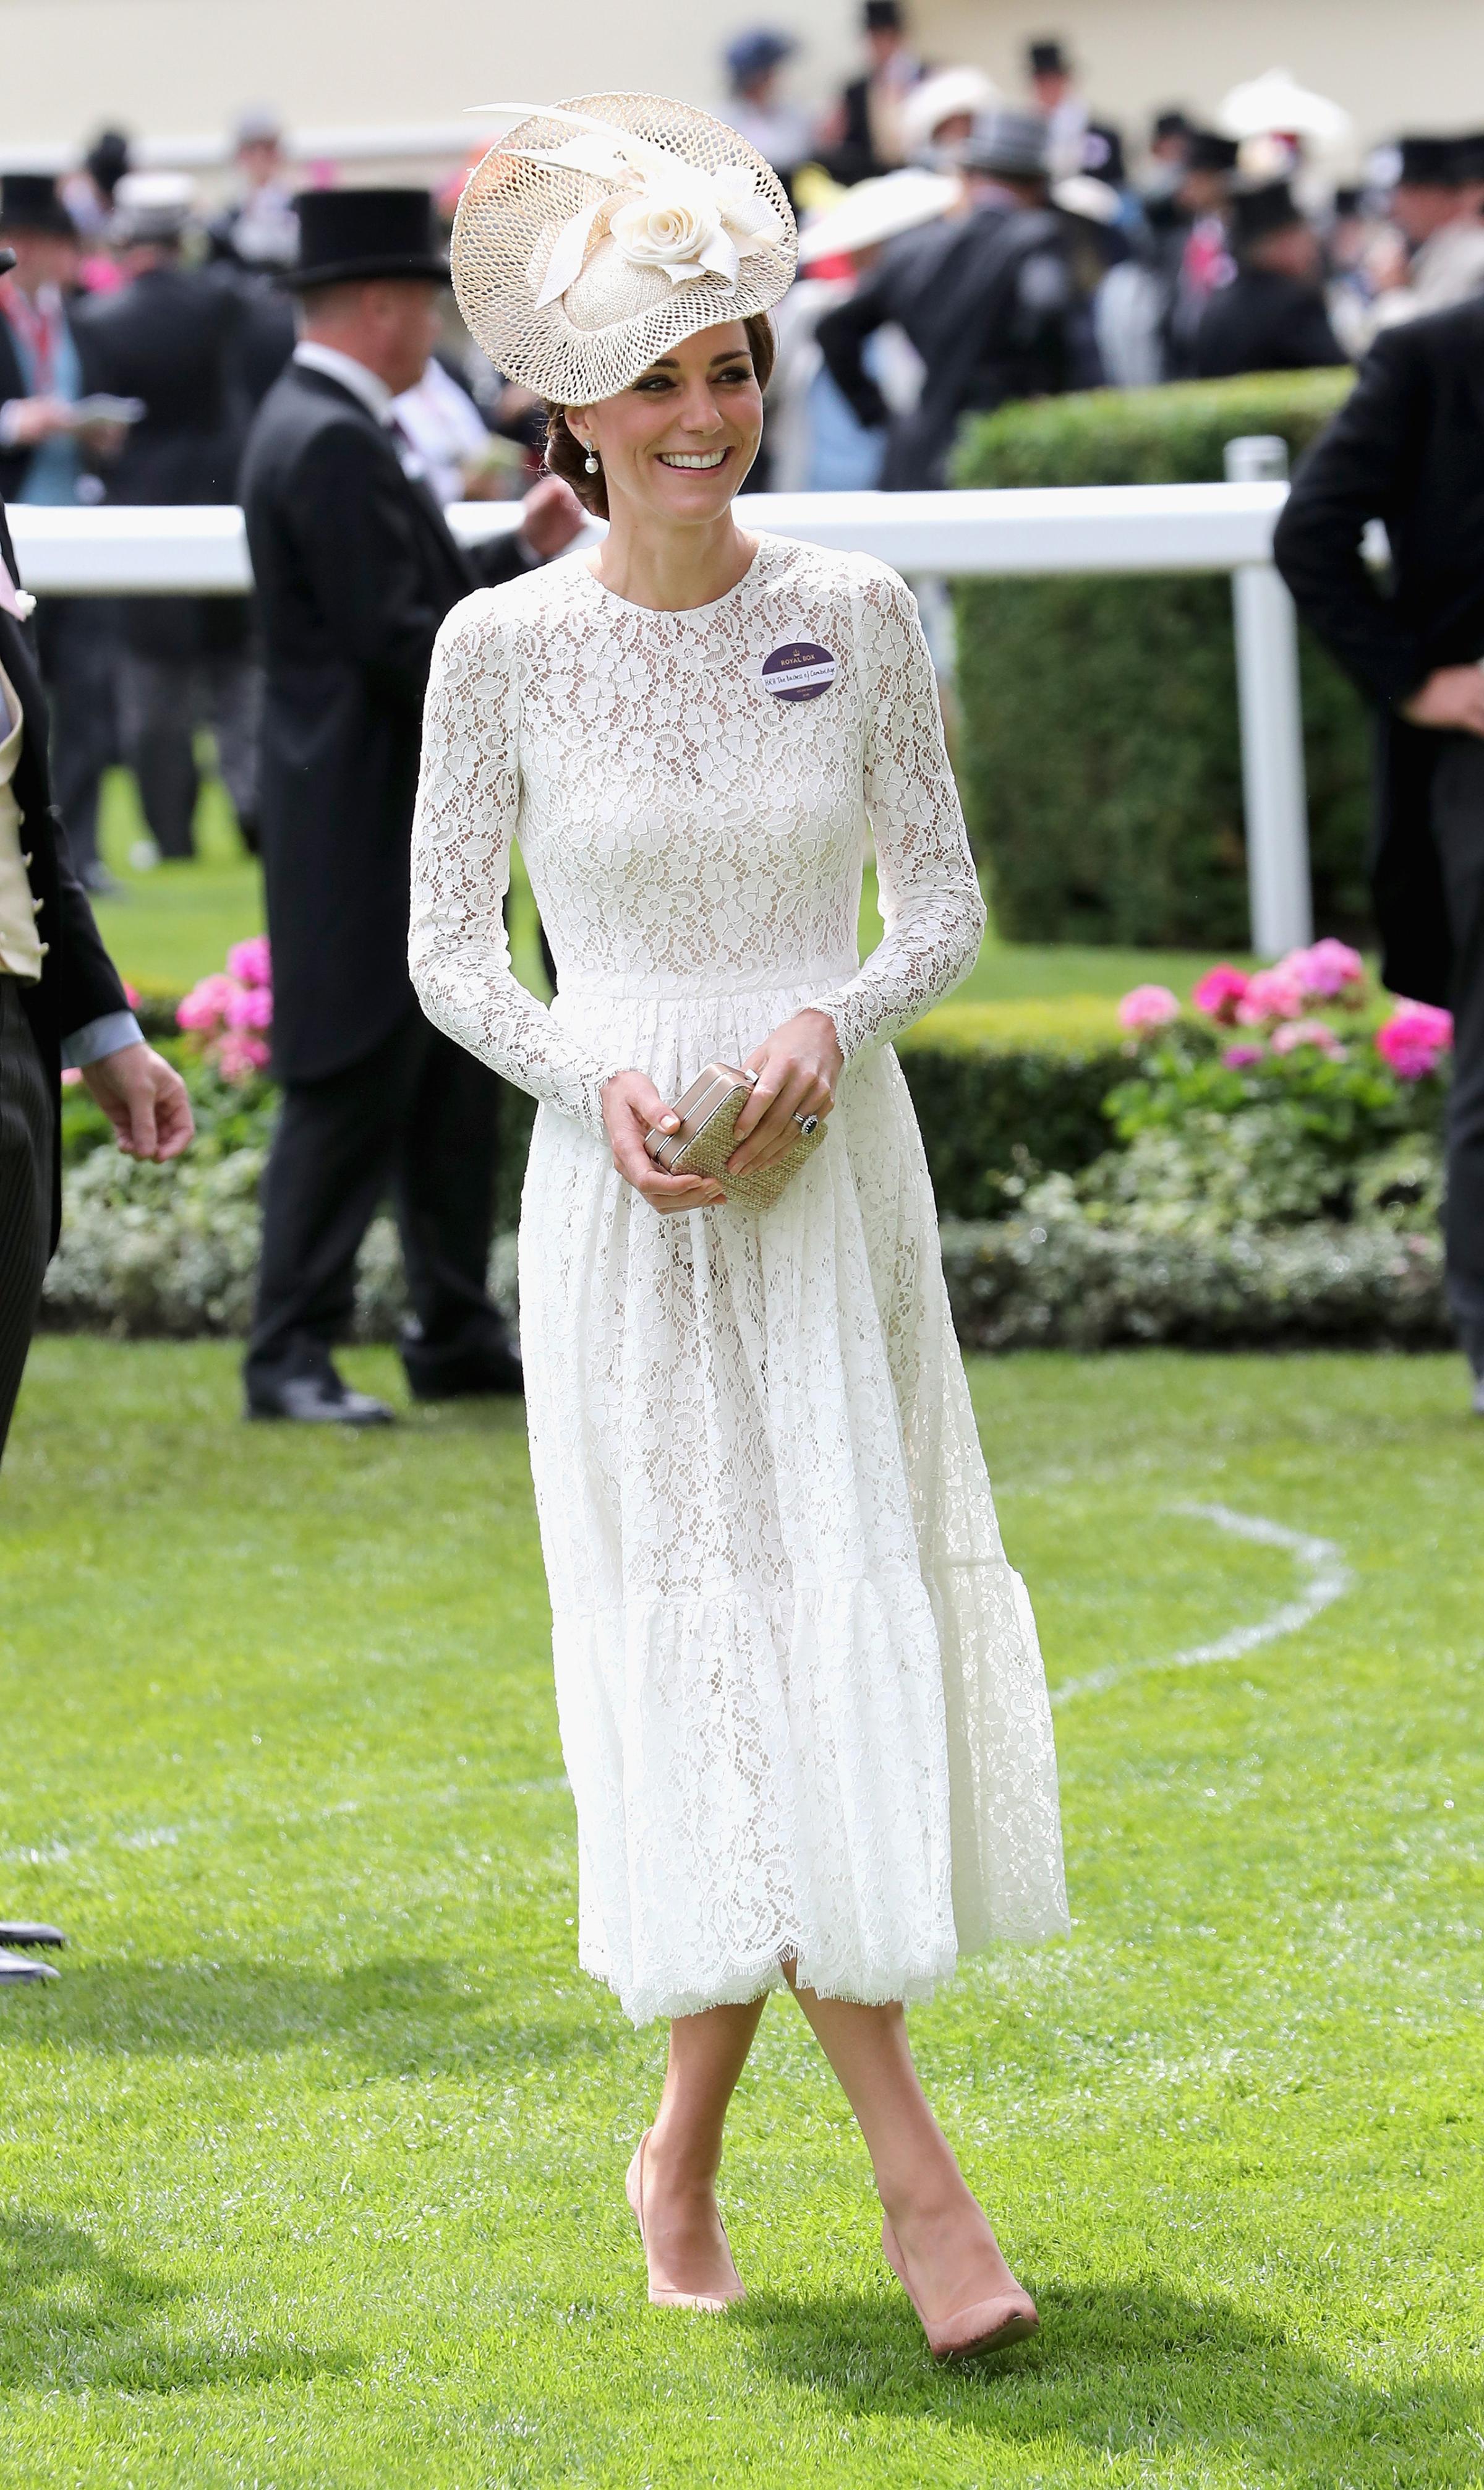 Catherine, Duchess of Cambridge, attends the second day of Royal Ascot at Ascot Racecourse in England on June 15, 2016.